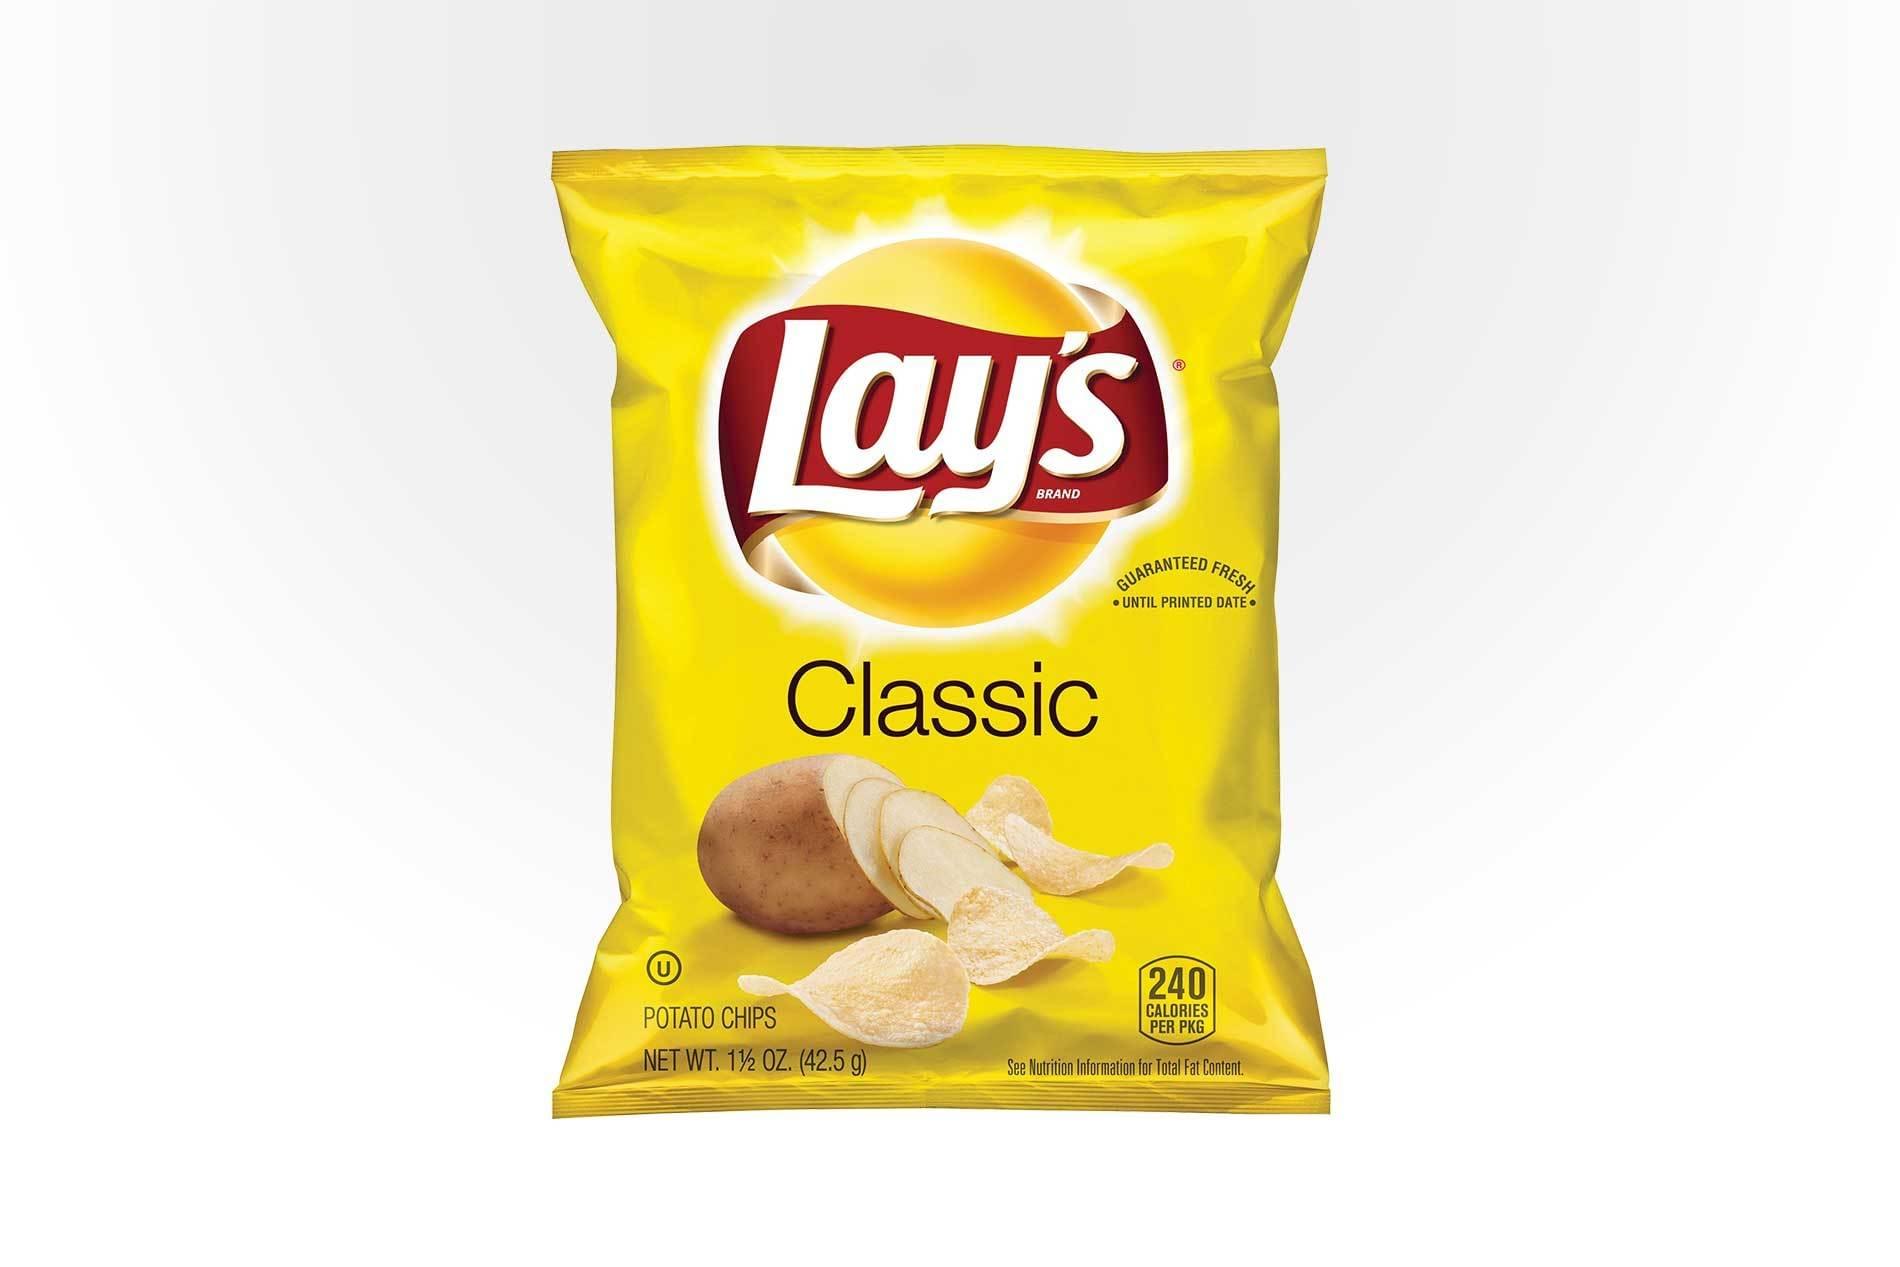 Jersey Mike's Lay's Classic Chips Nutrition Facts